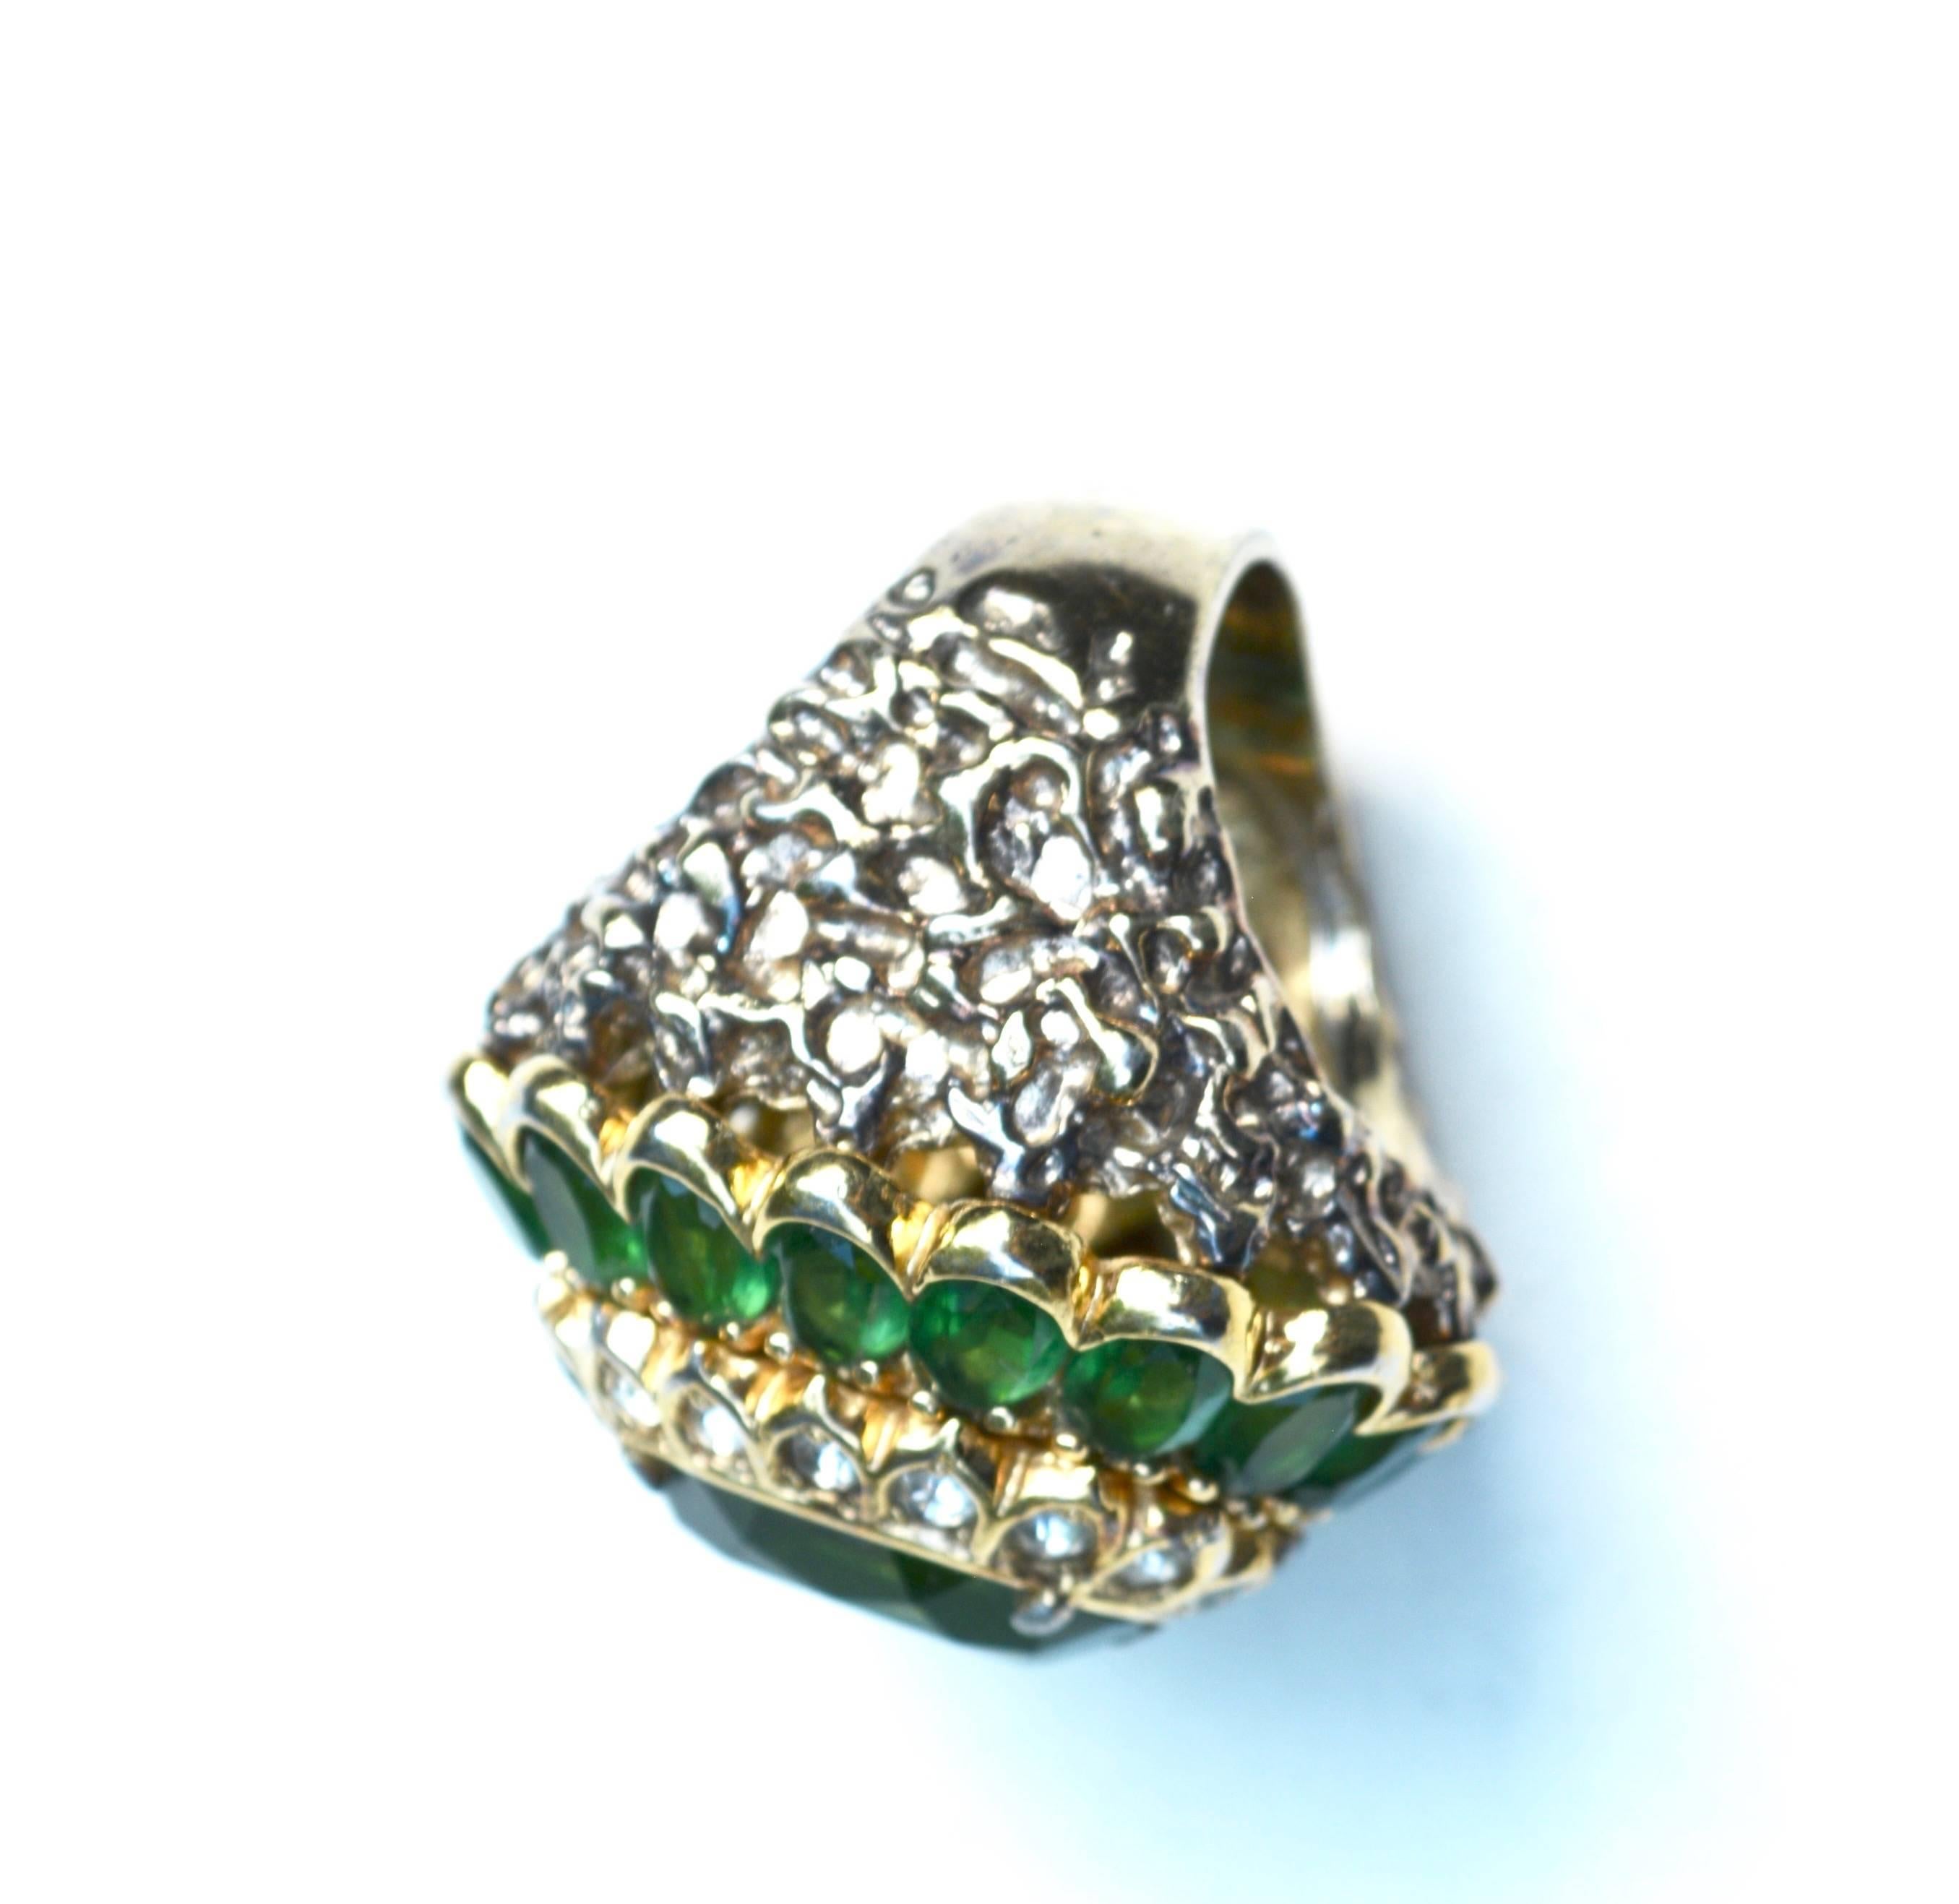 Oversized green glass signed Panetta 1960s-70s cocktail ring. Good overall with a bit of wear to the stone in the form of a graze- thin scratch, see images. Great vibrant green. 1.75″ long by 1.5″ wide face. Size 7 ring.